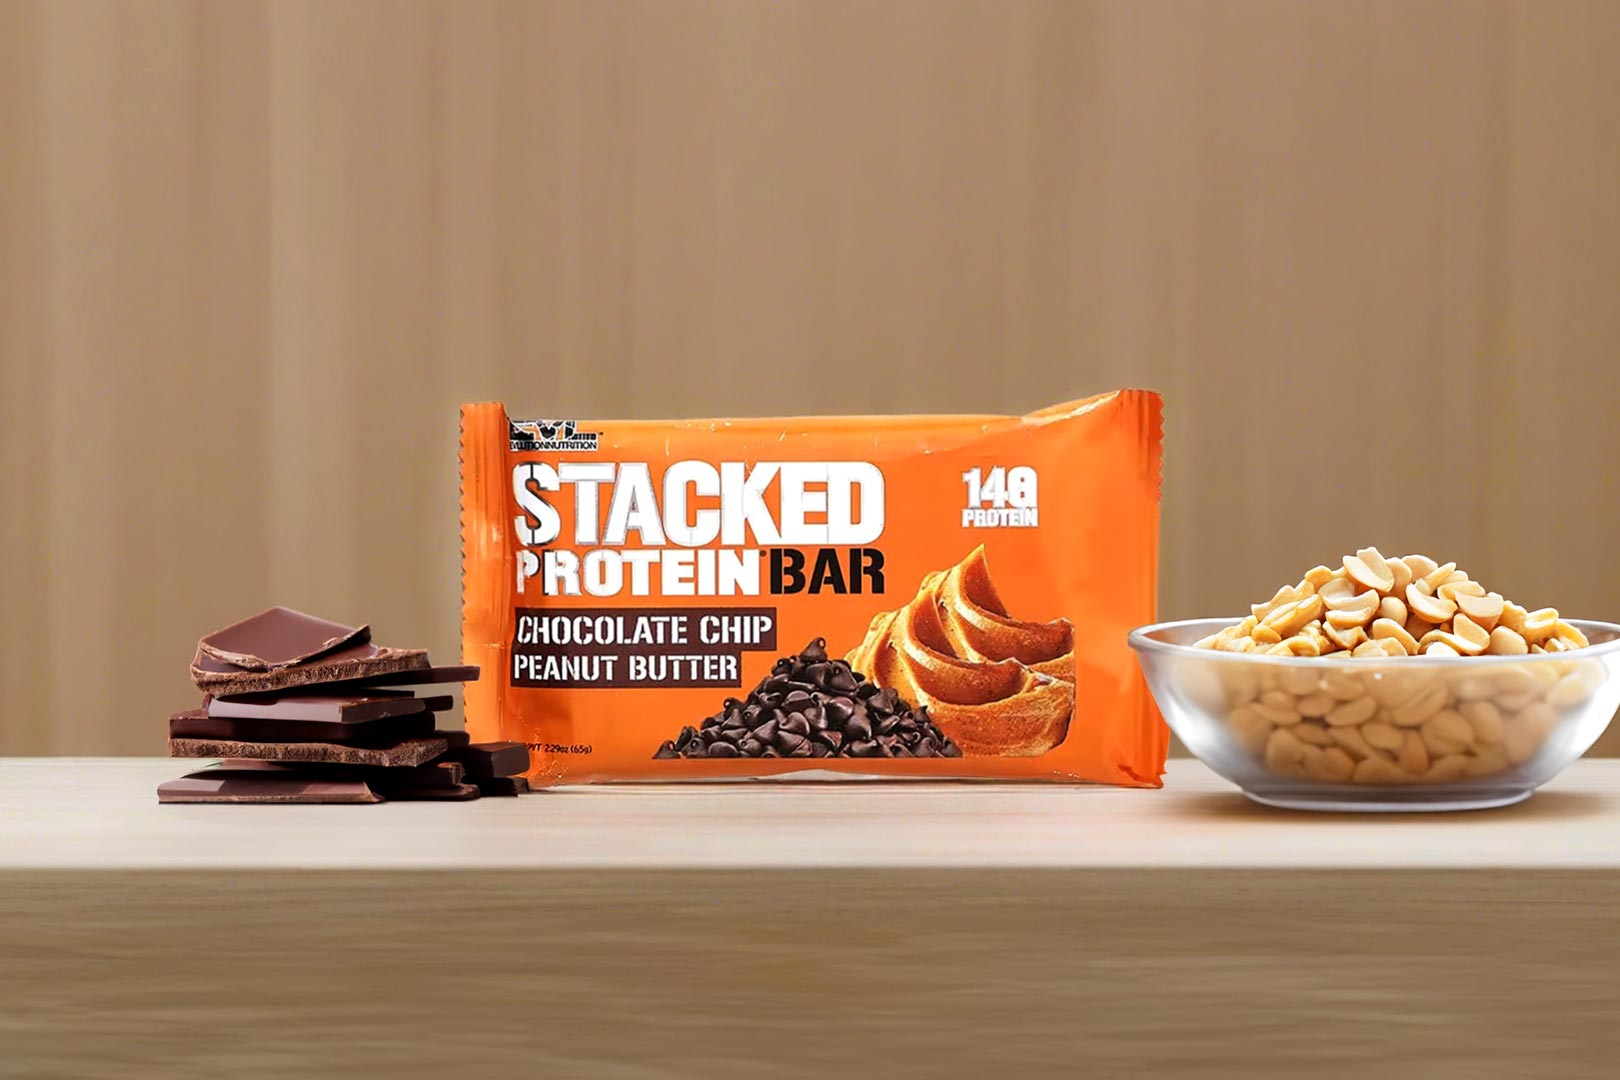 Peanut butter-based EVL Stacked Protein Bar with 14g of protein